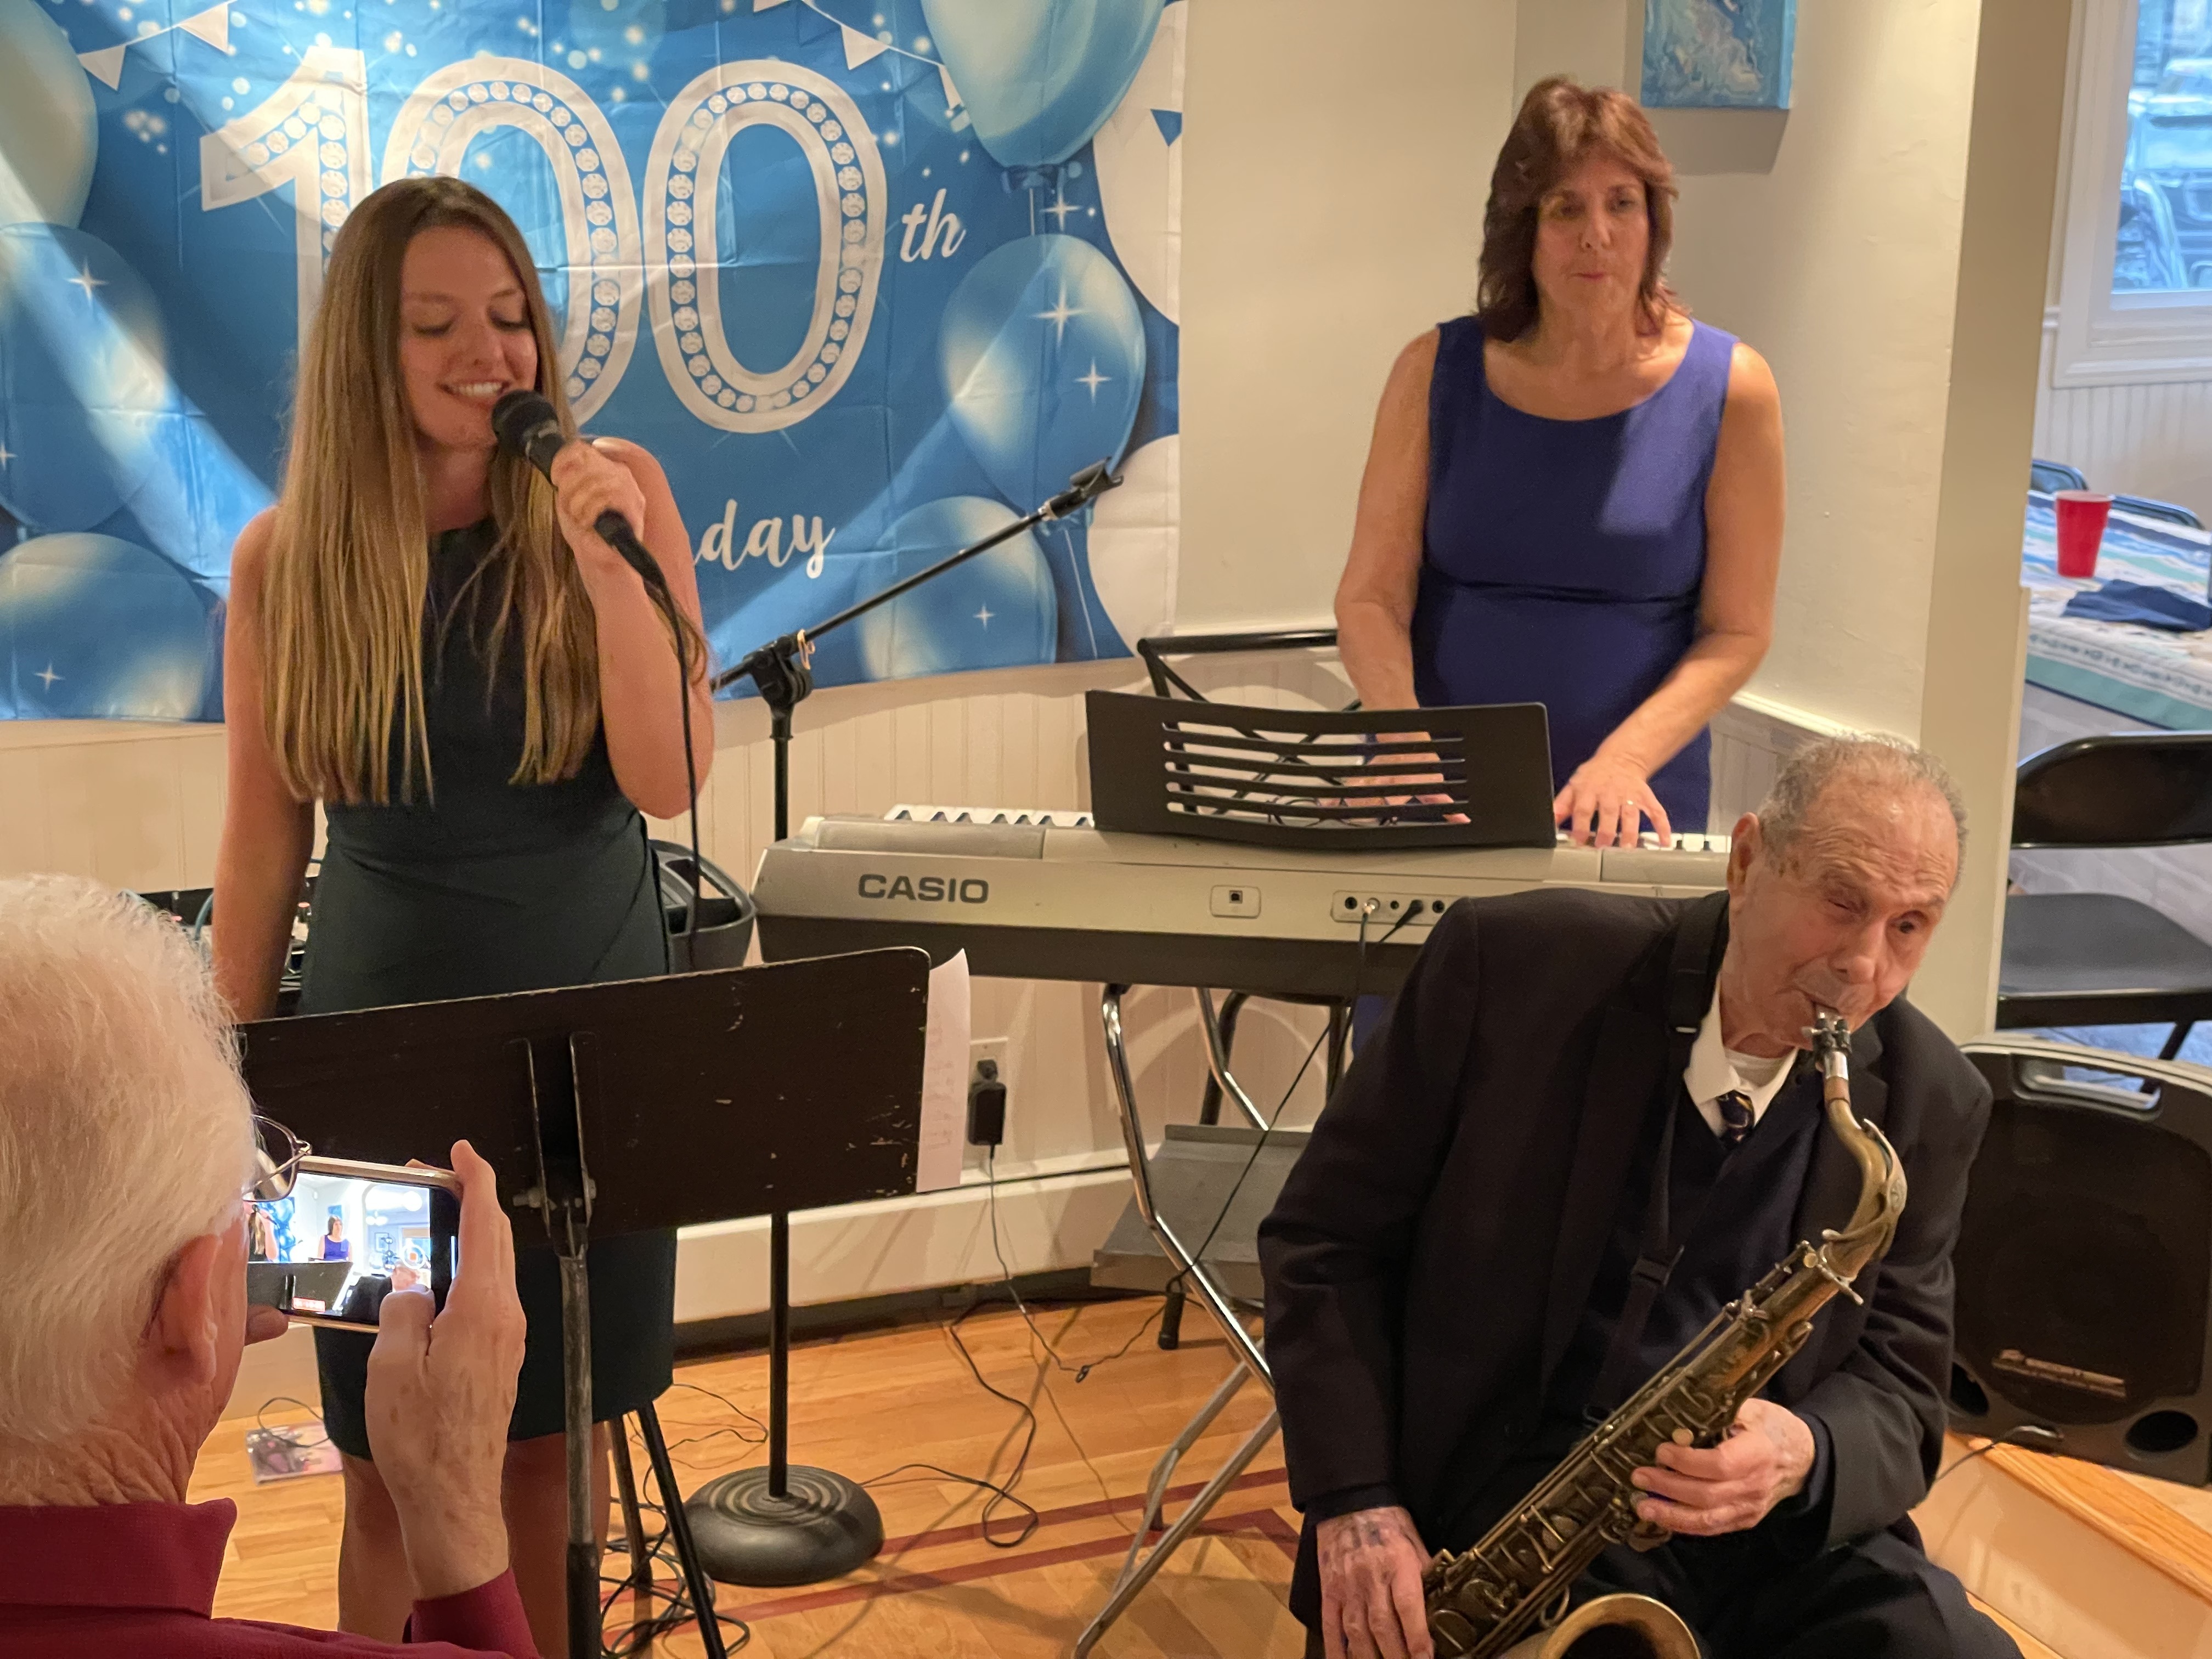 Pat DeRosa with his daughter, Patricia DeRosa Padden, and his granddaughter, Nicole DeRosa Padden, performing together.